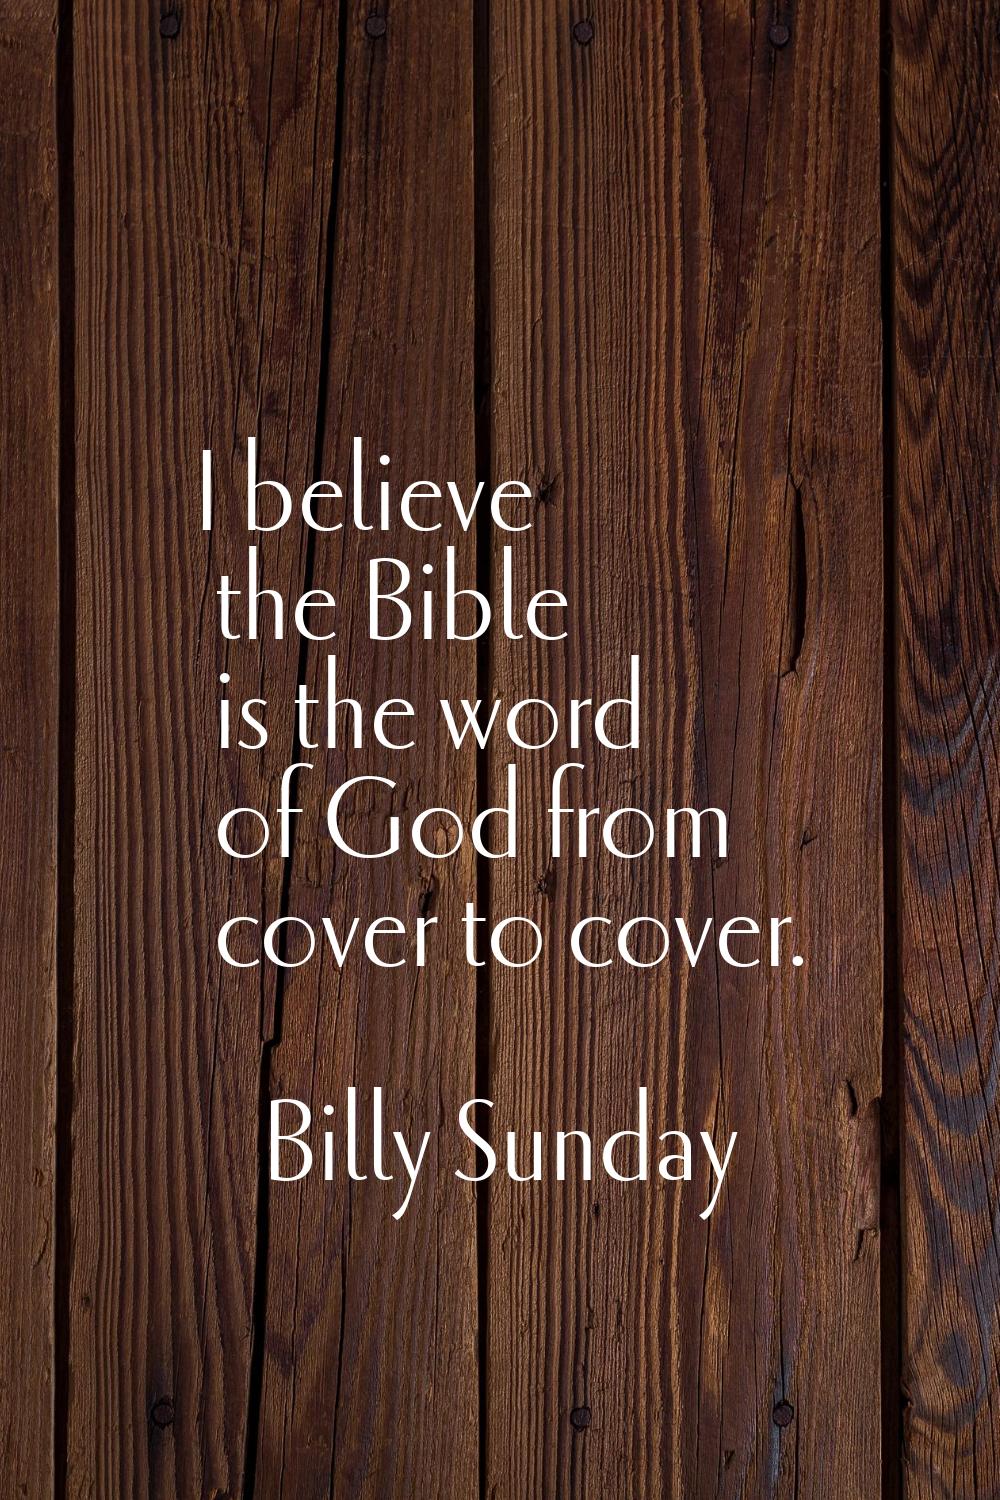 I believe the Bible is the word of God from cover to cover.